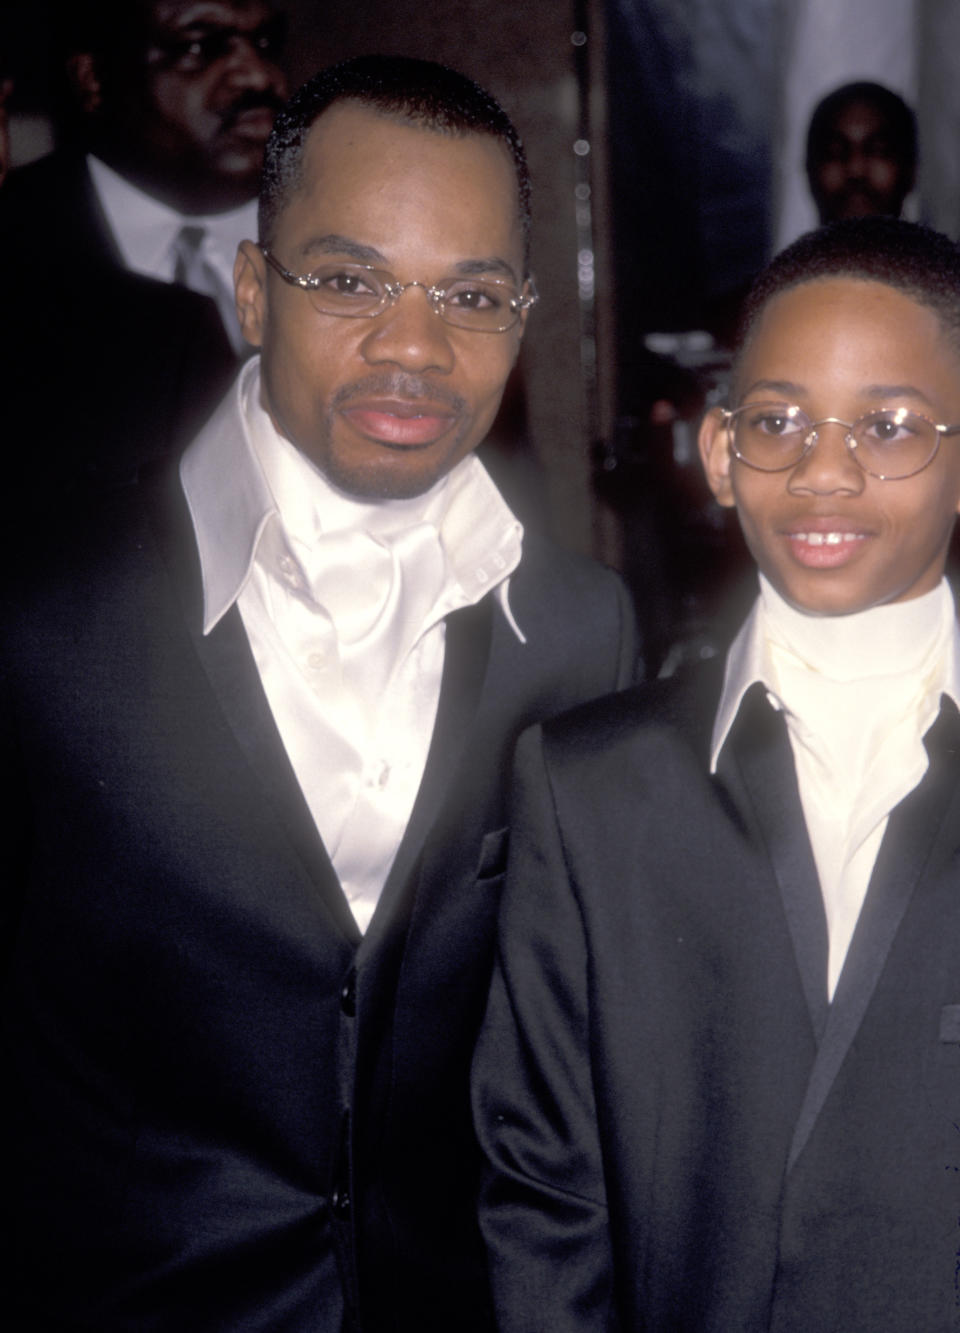 Singer Kirk Franklin and son Kerrion Franklin attend the 1999 Essence Awards on April 30, 1999 at Madison Square Garden in New York City. - Credit: Ron Galella, Ltd./Ron Galella Collection via Getty Images